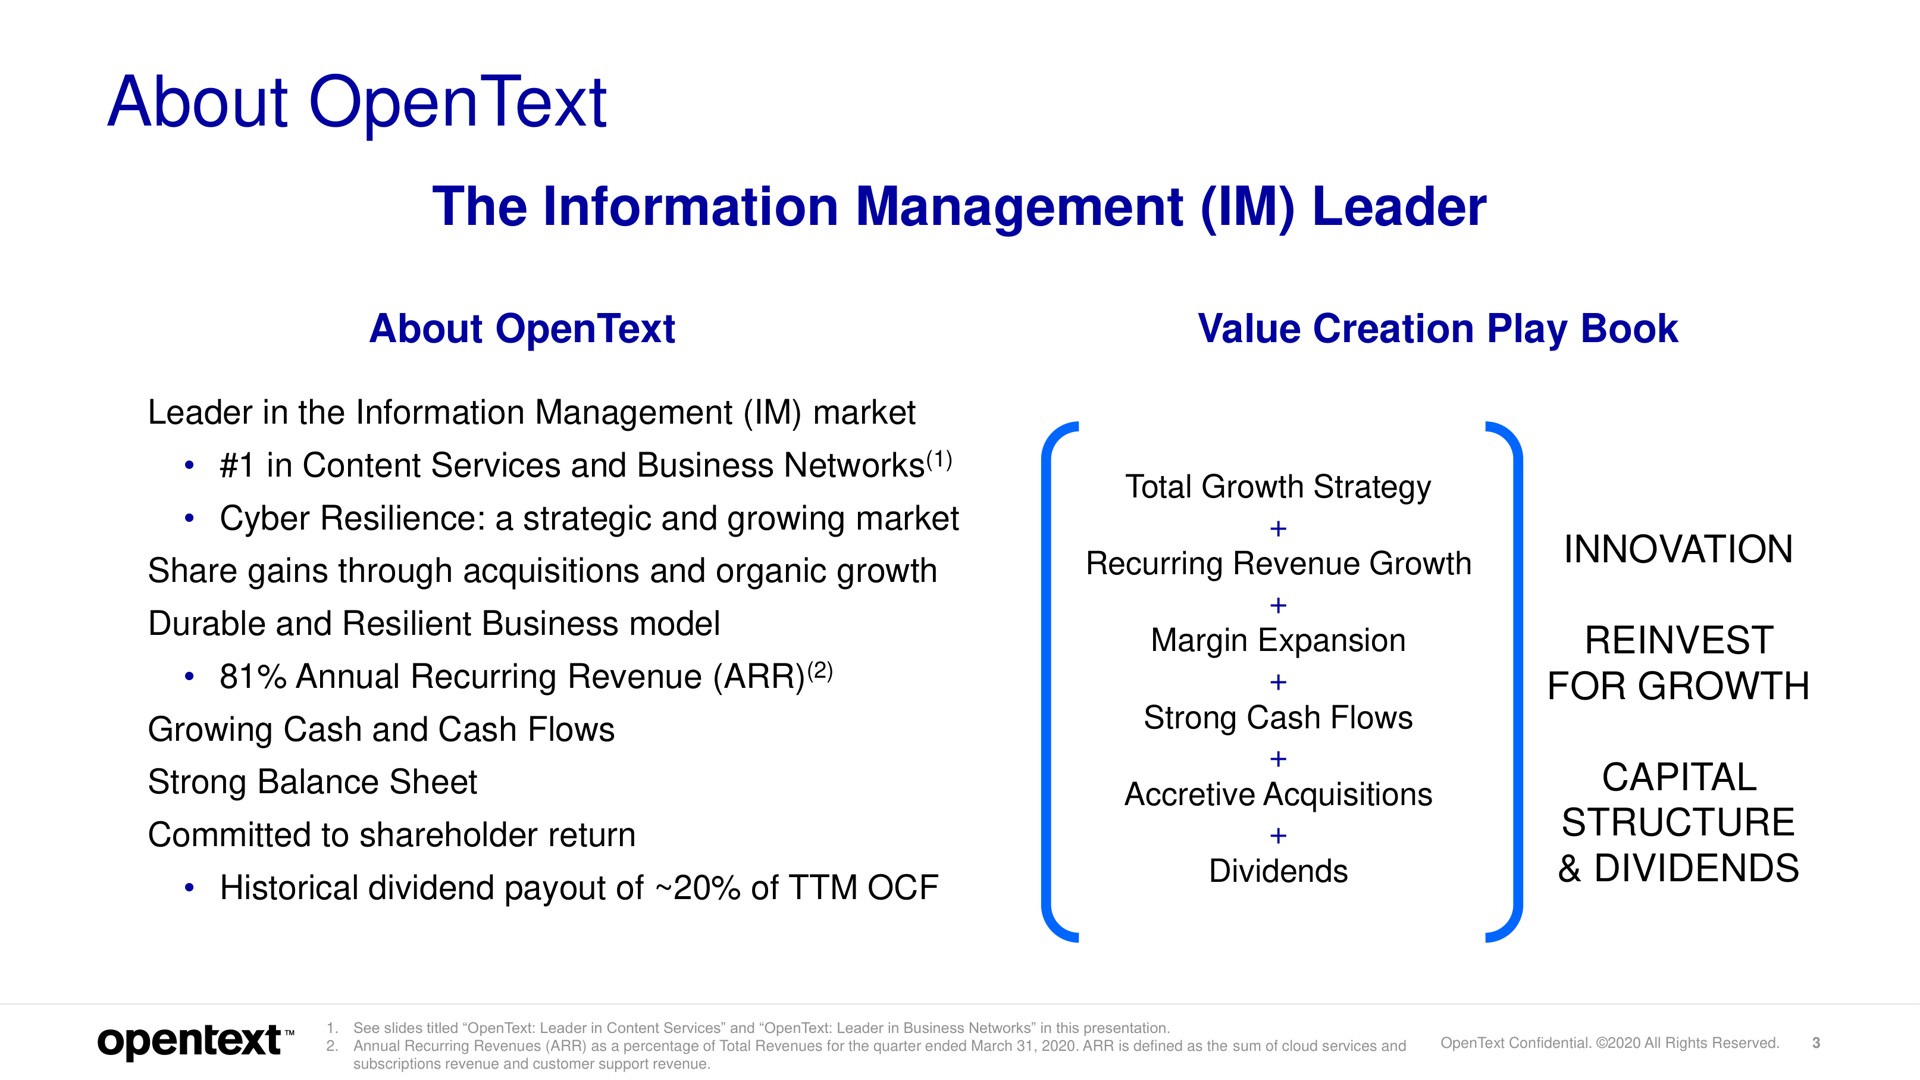 about the information management leader | OpenText